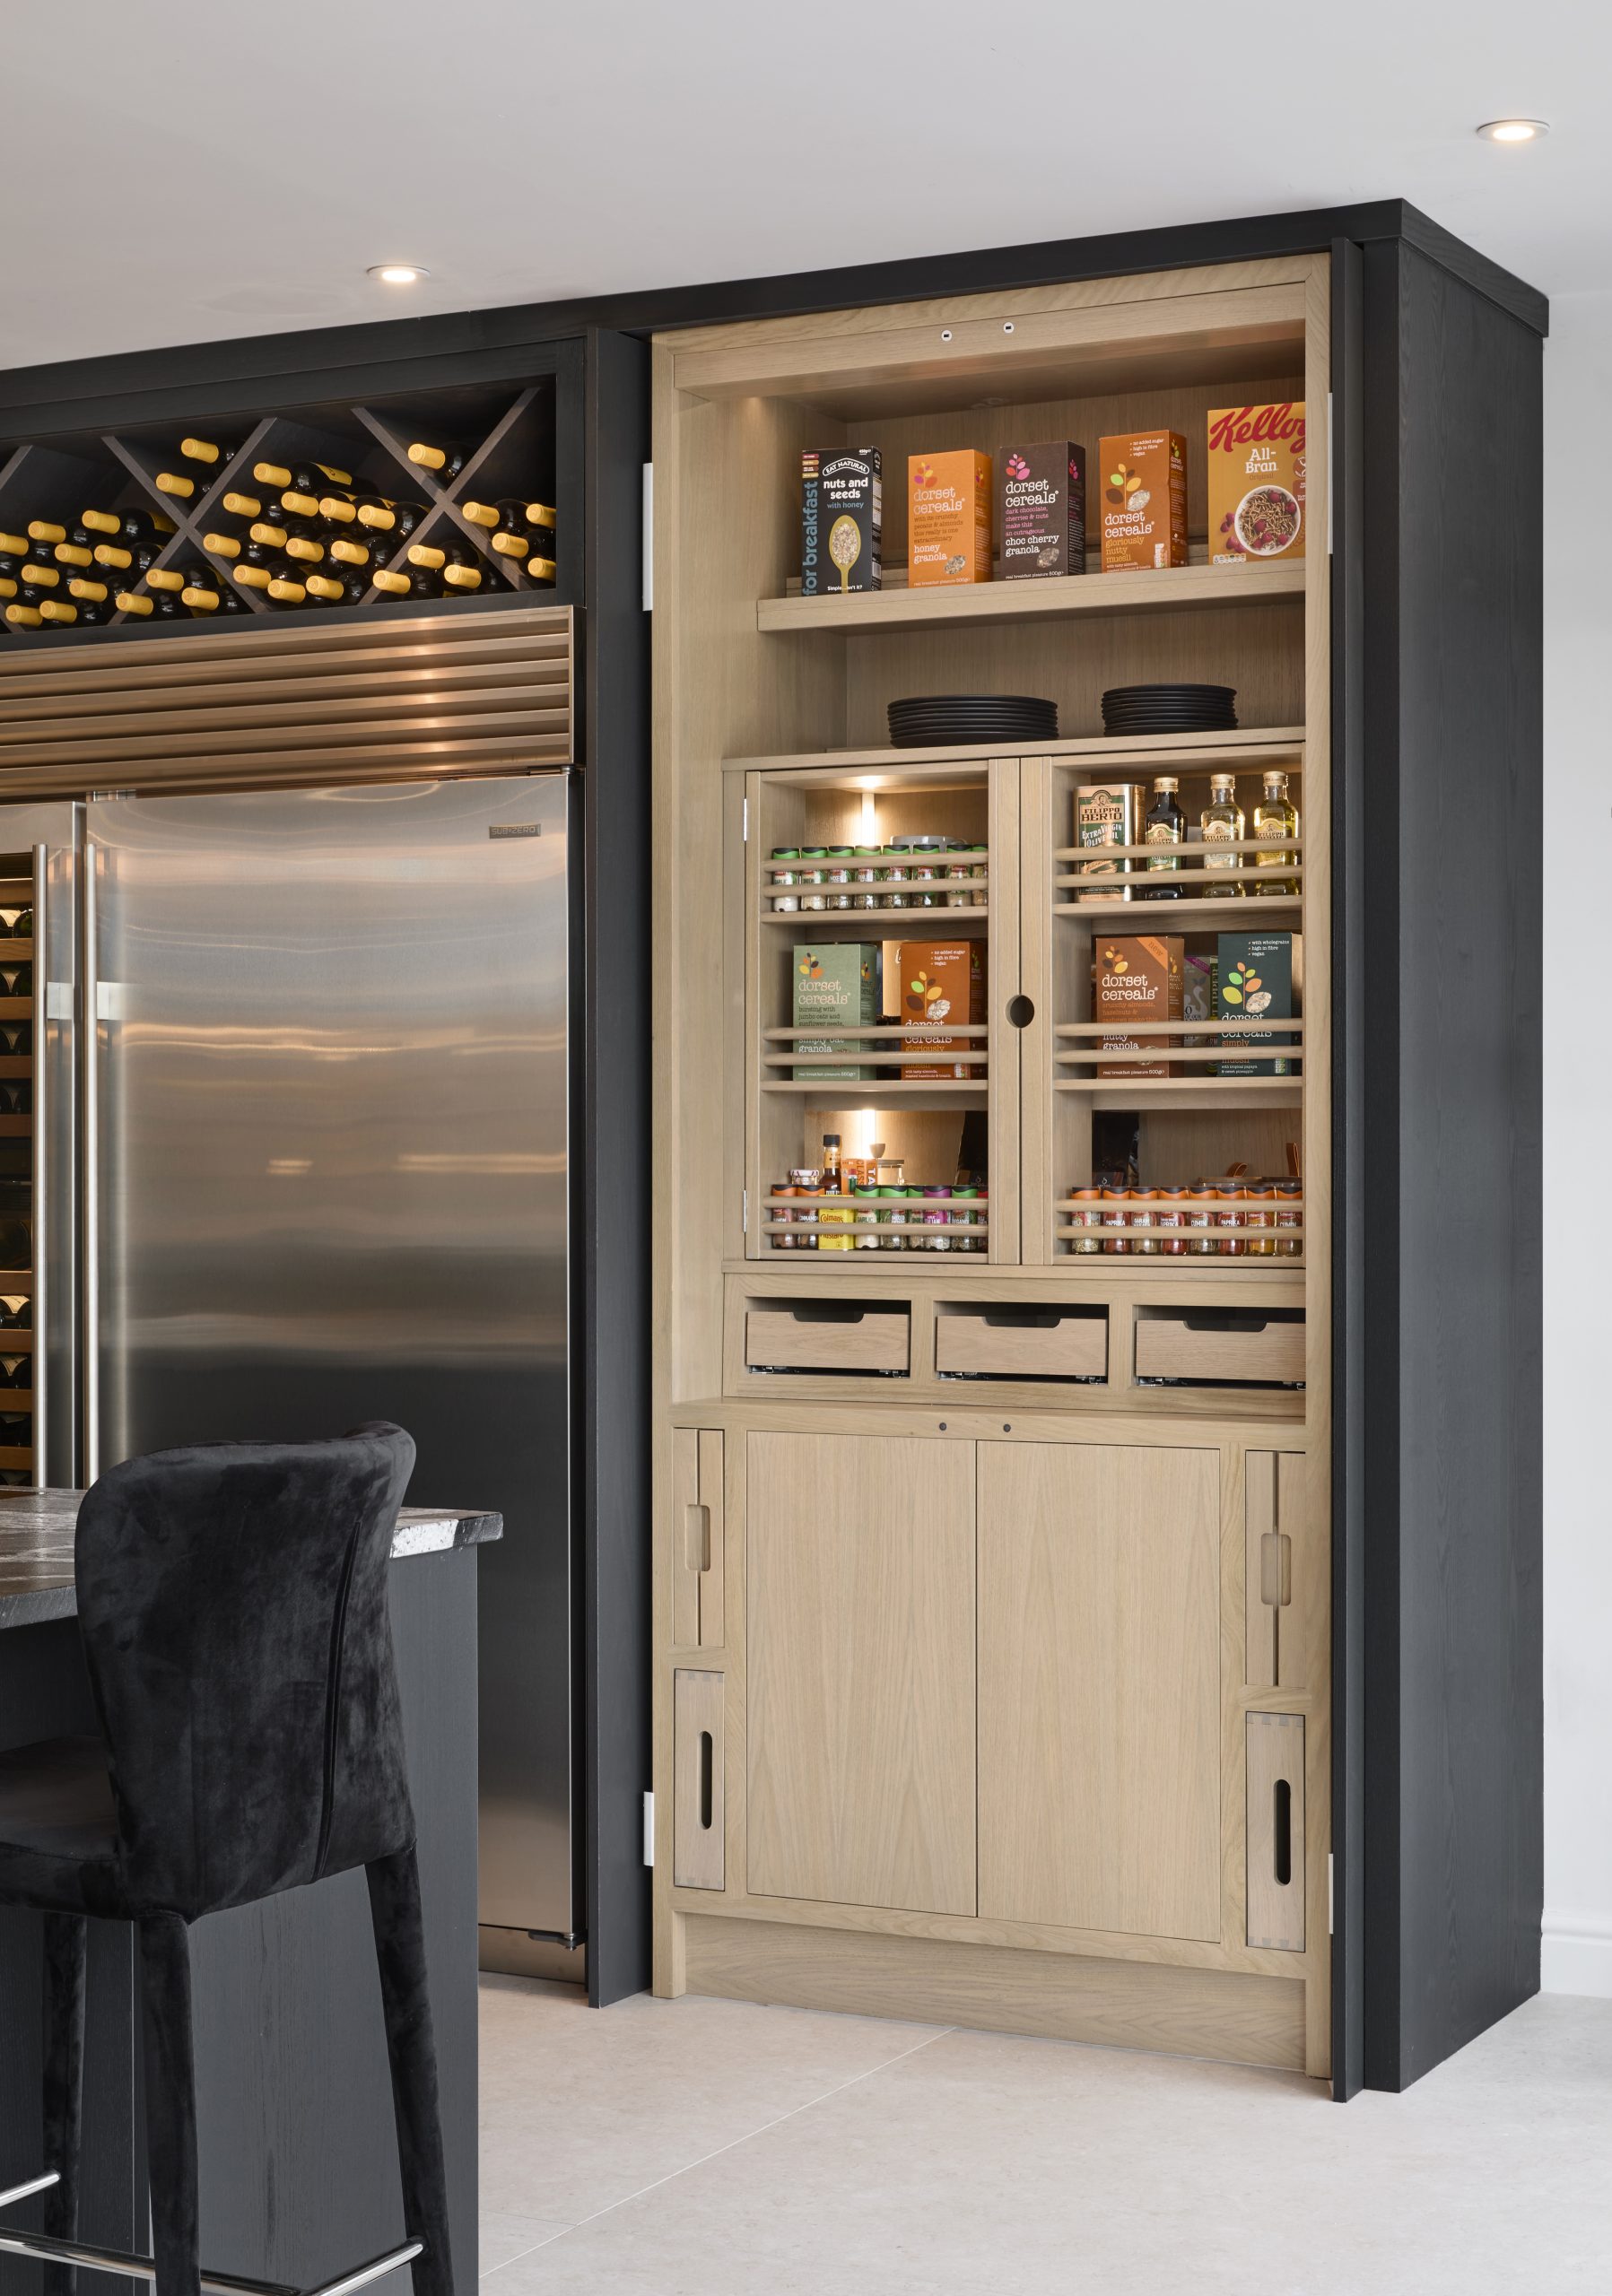 Cooks & Company cupboard pantry is a popular addition to any new luxury bespoke kitchen